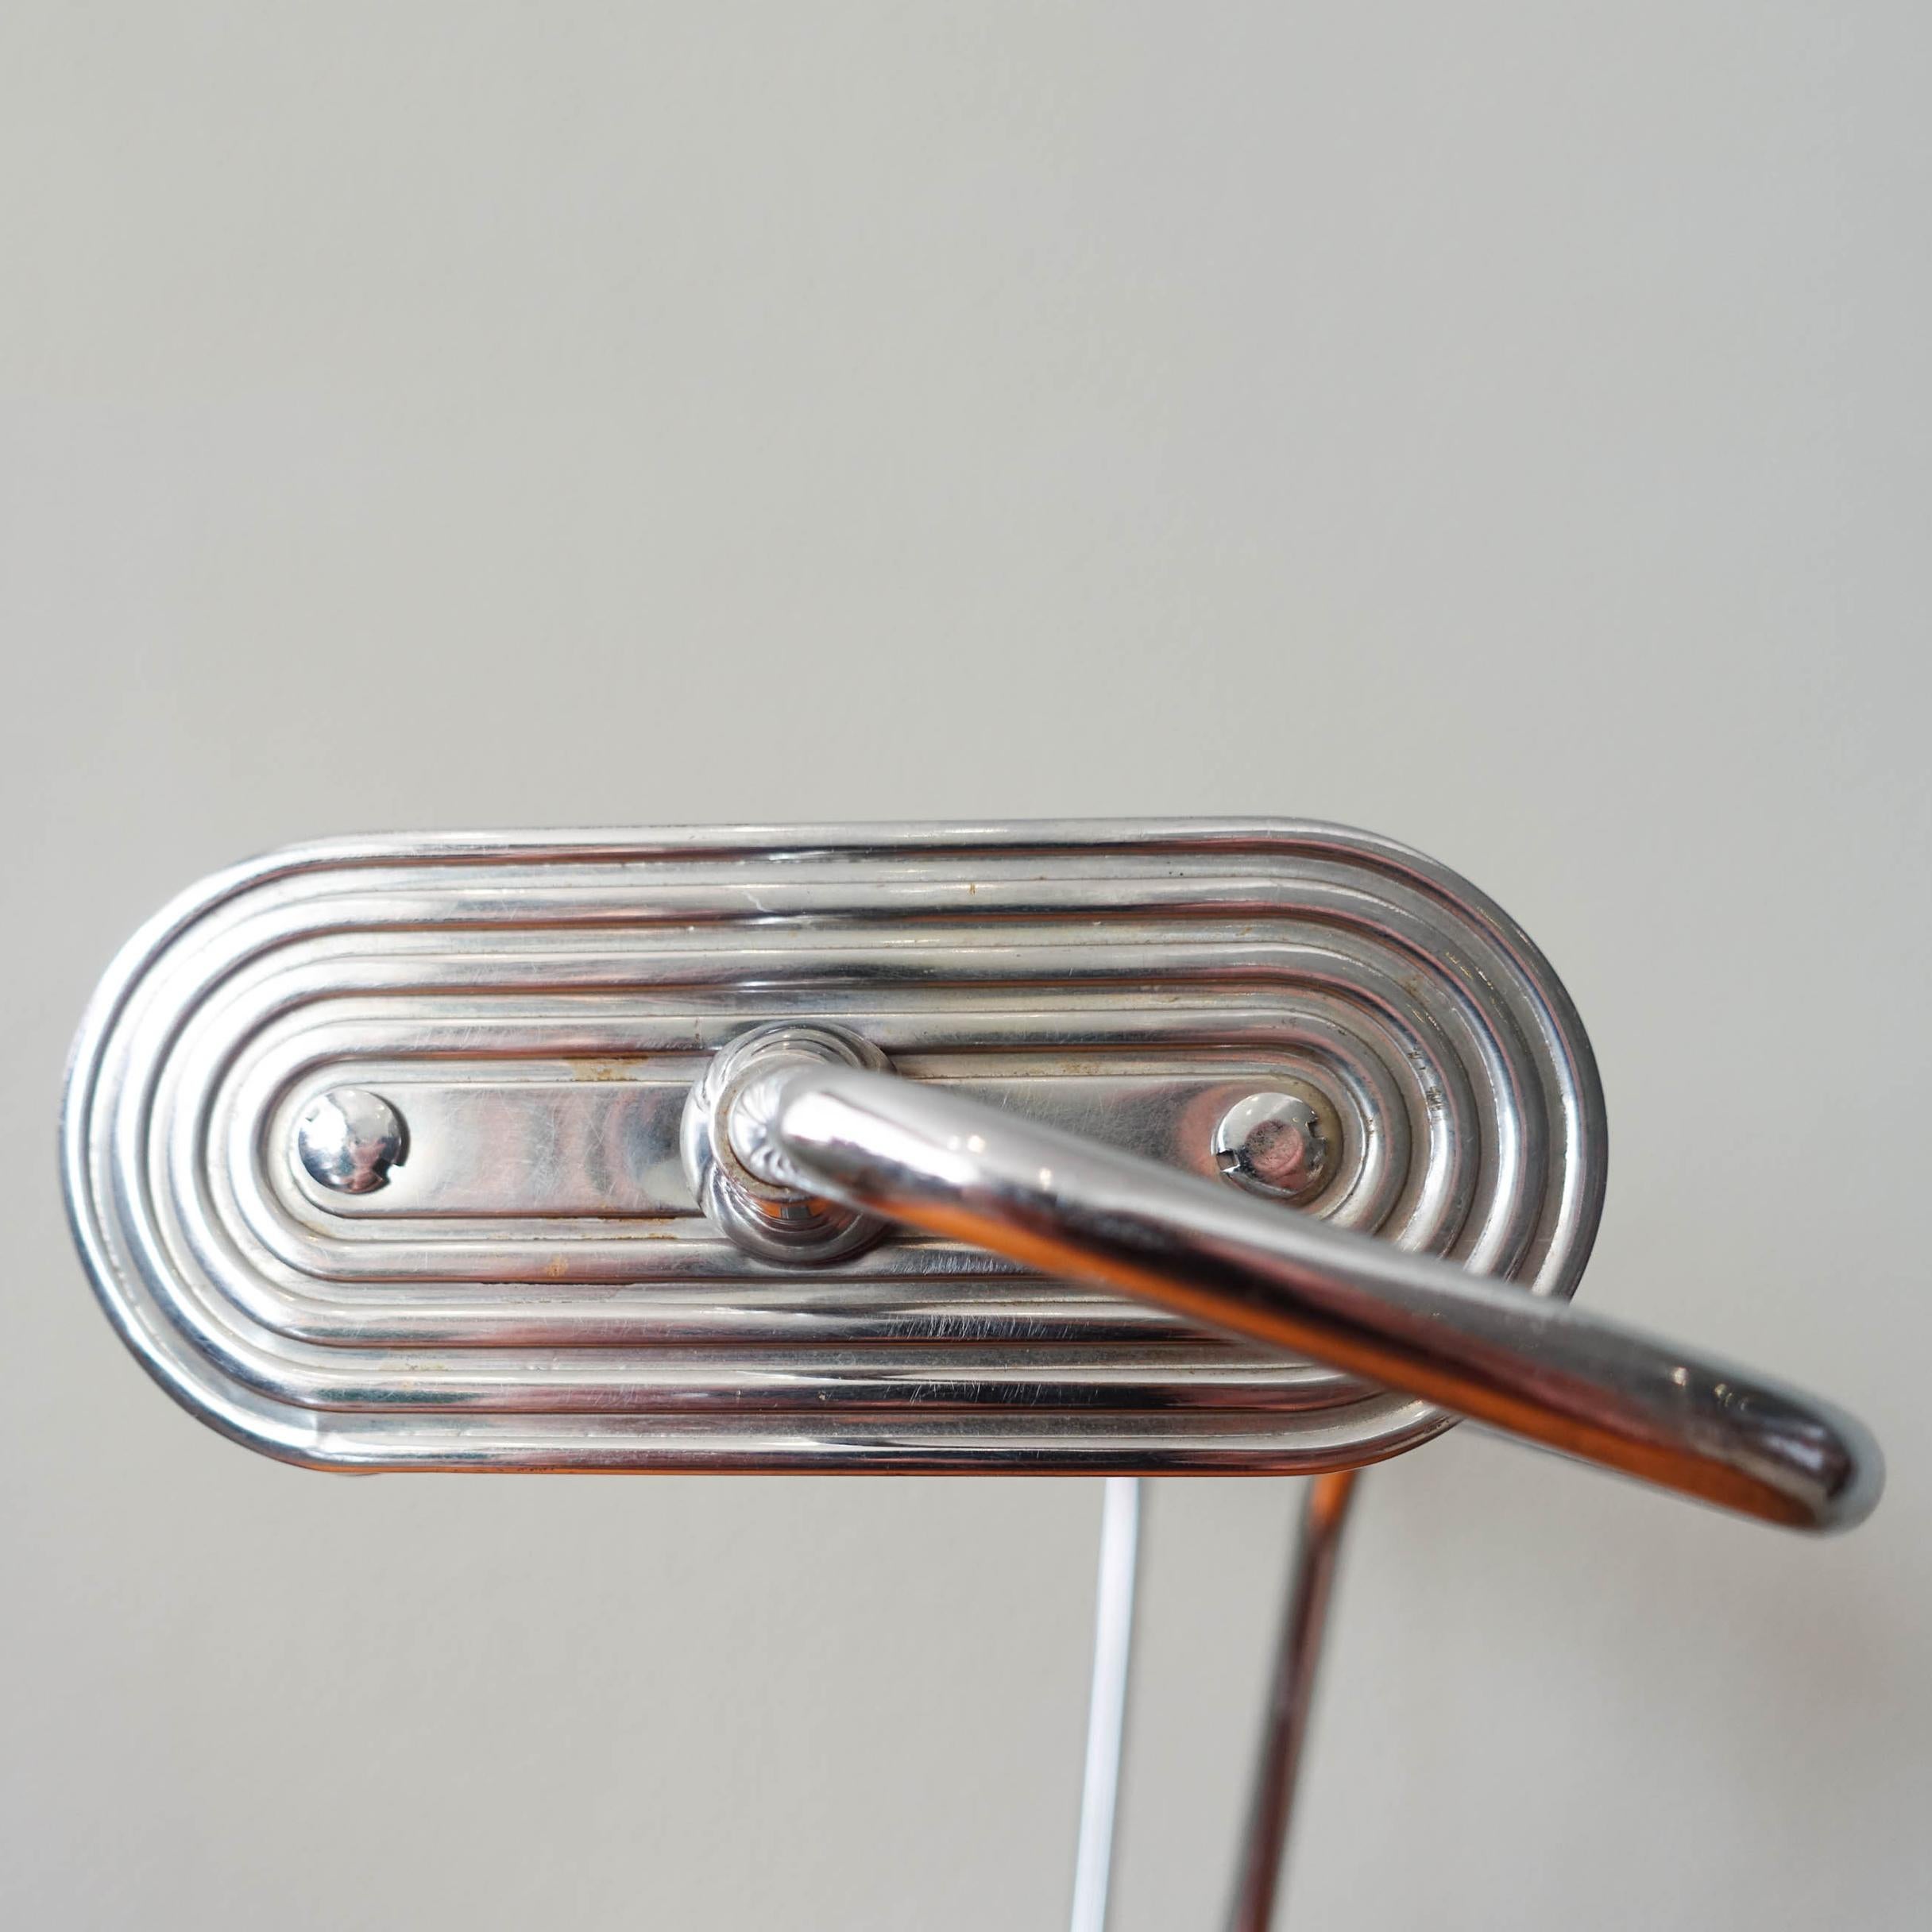 No.71 Desk Lamp by Eileen Gray for Jumo, 1930s For Sale 3